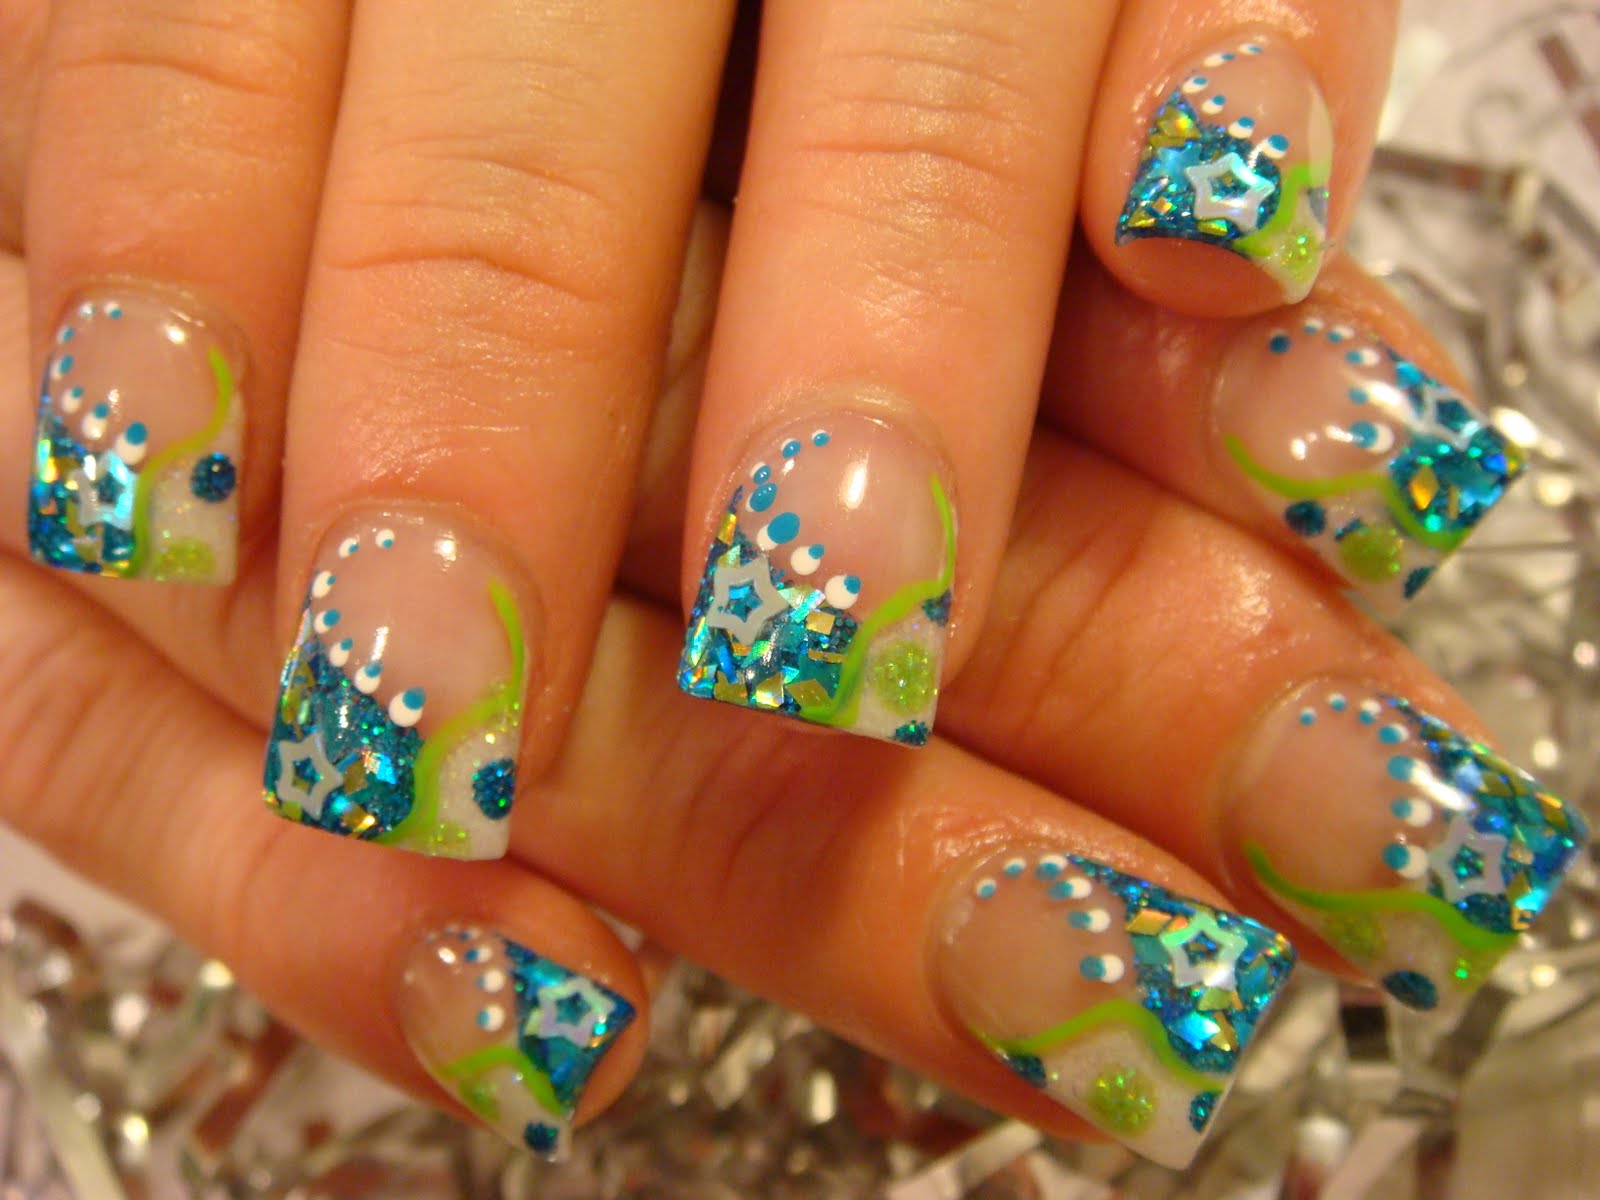 1. Summer Nail Art Ideas for August - wide 5